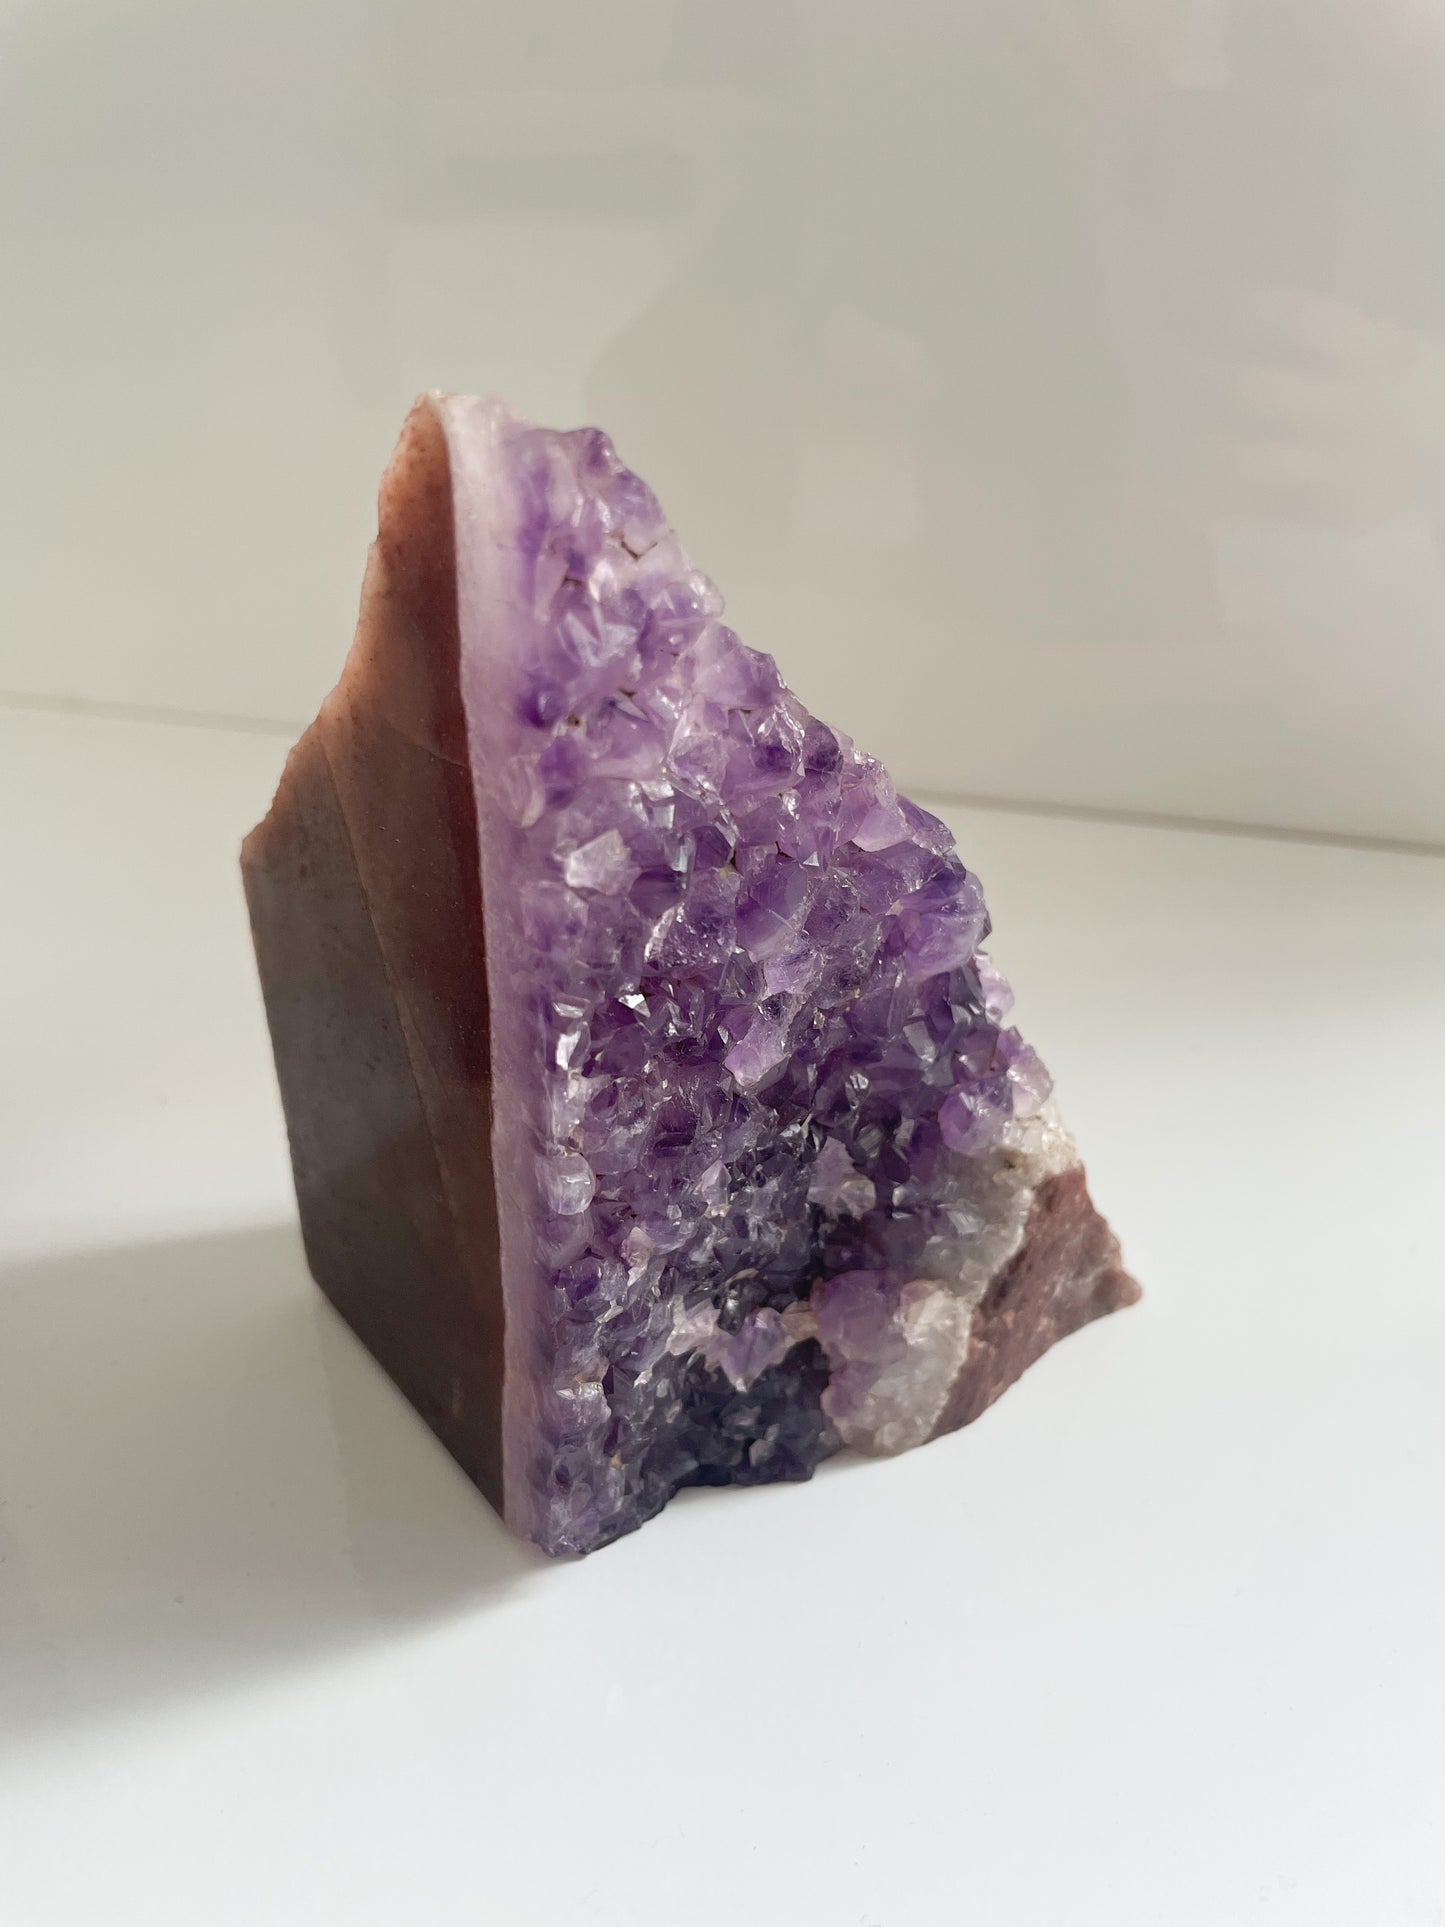 Amethyst stone agate bookends